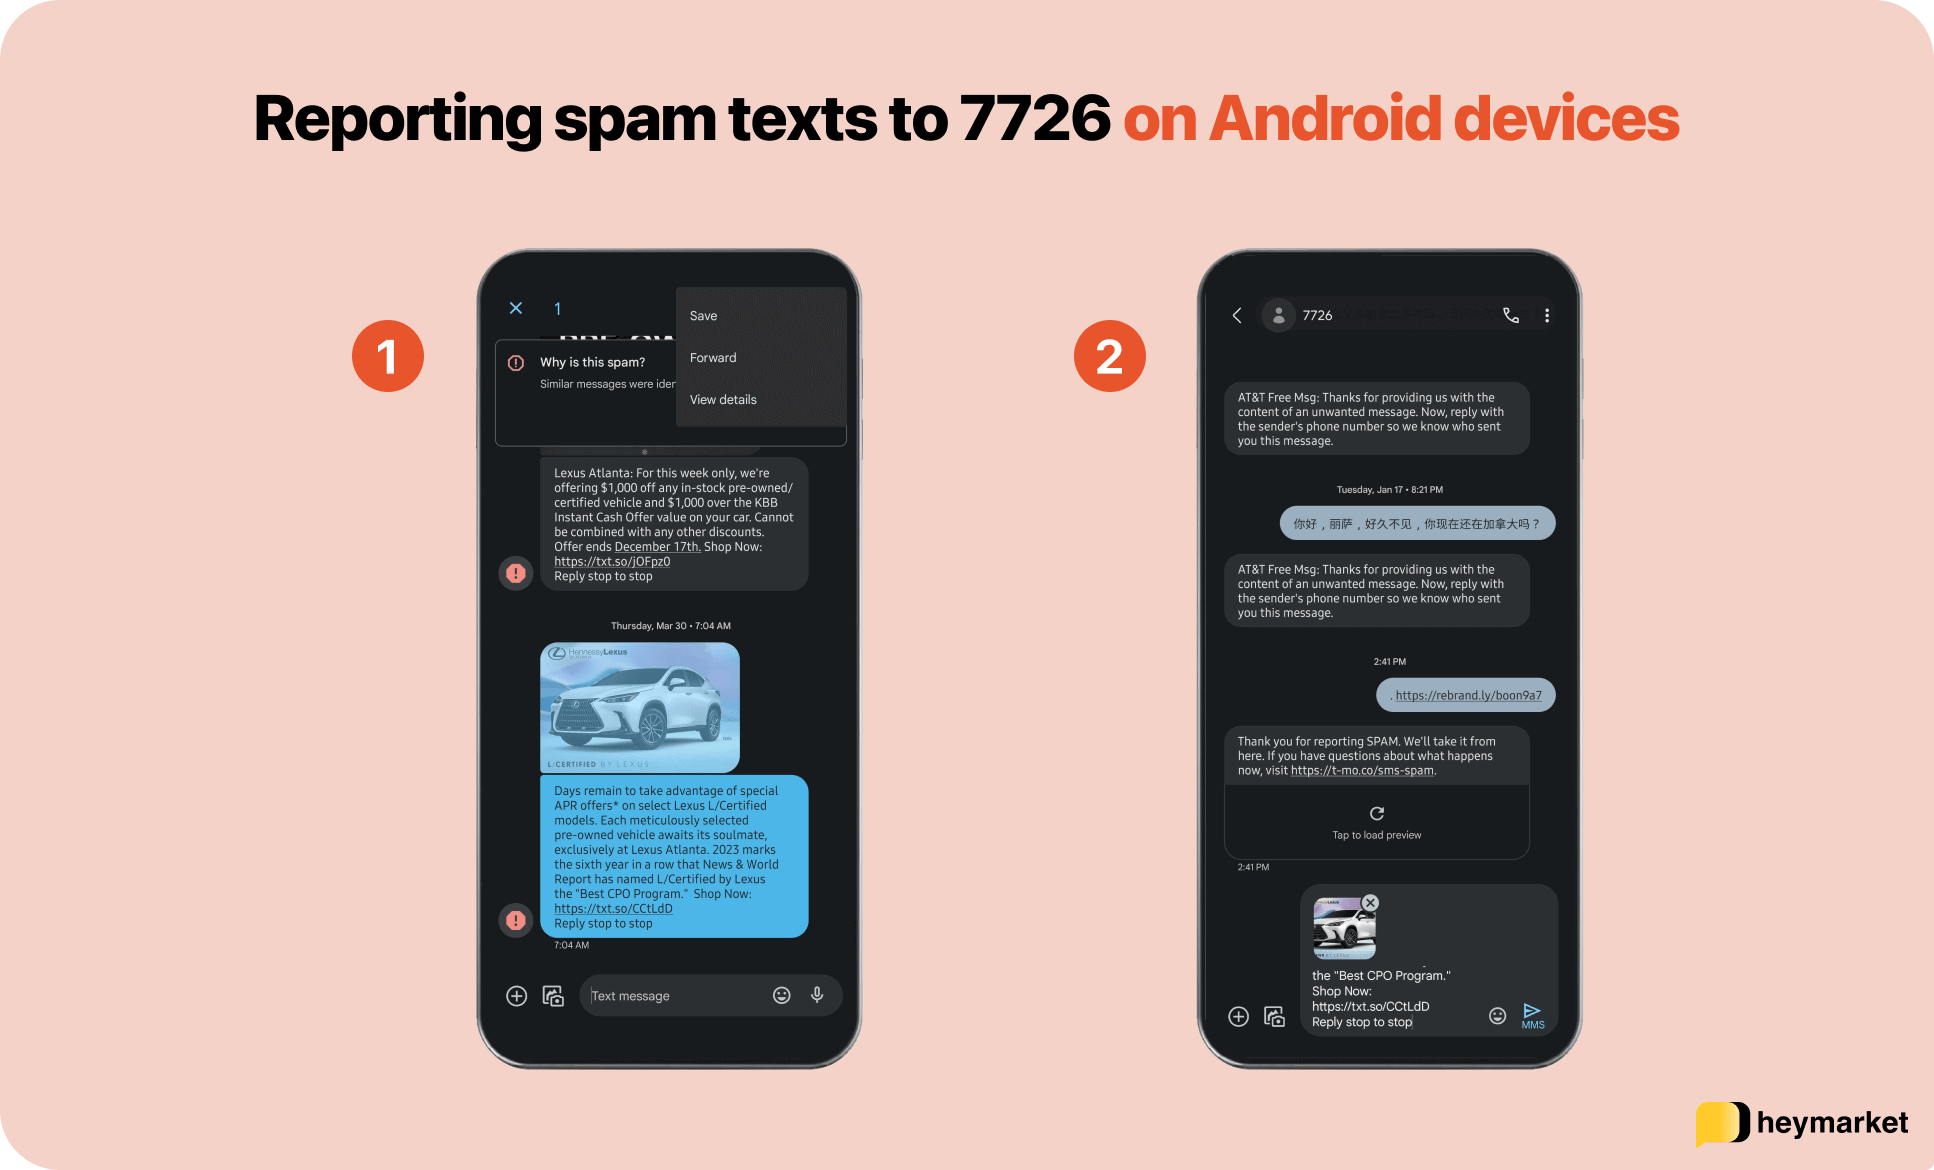 Steps for reporting a spam text to 7726 on Android phones